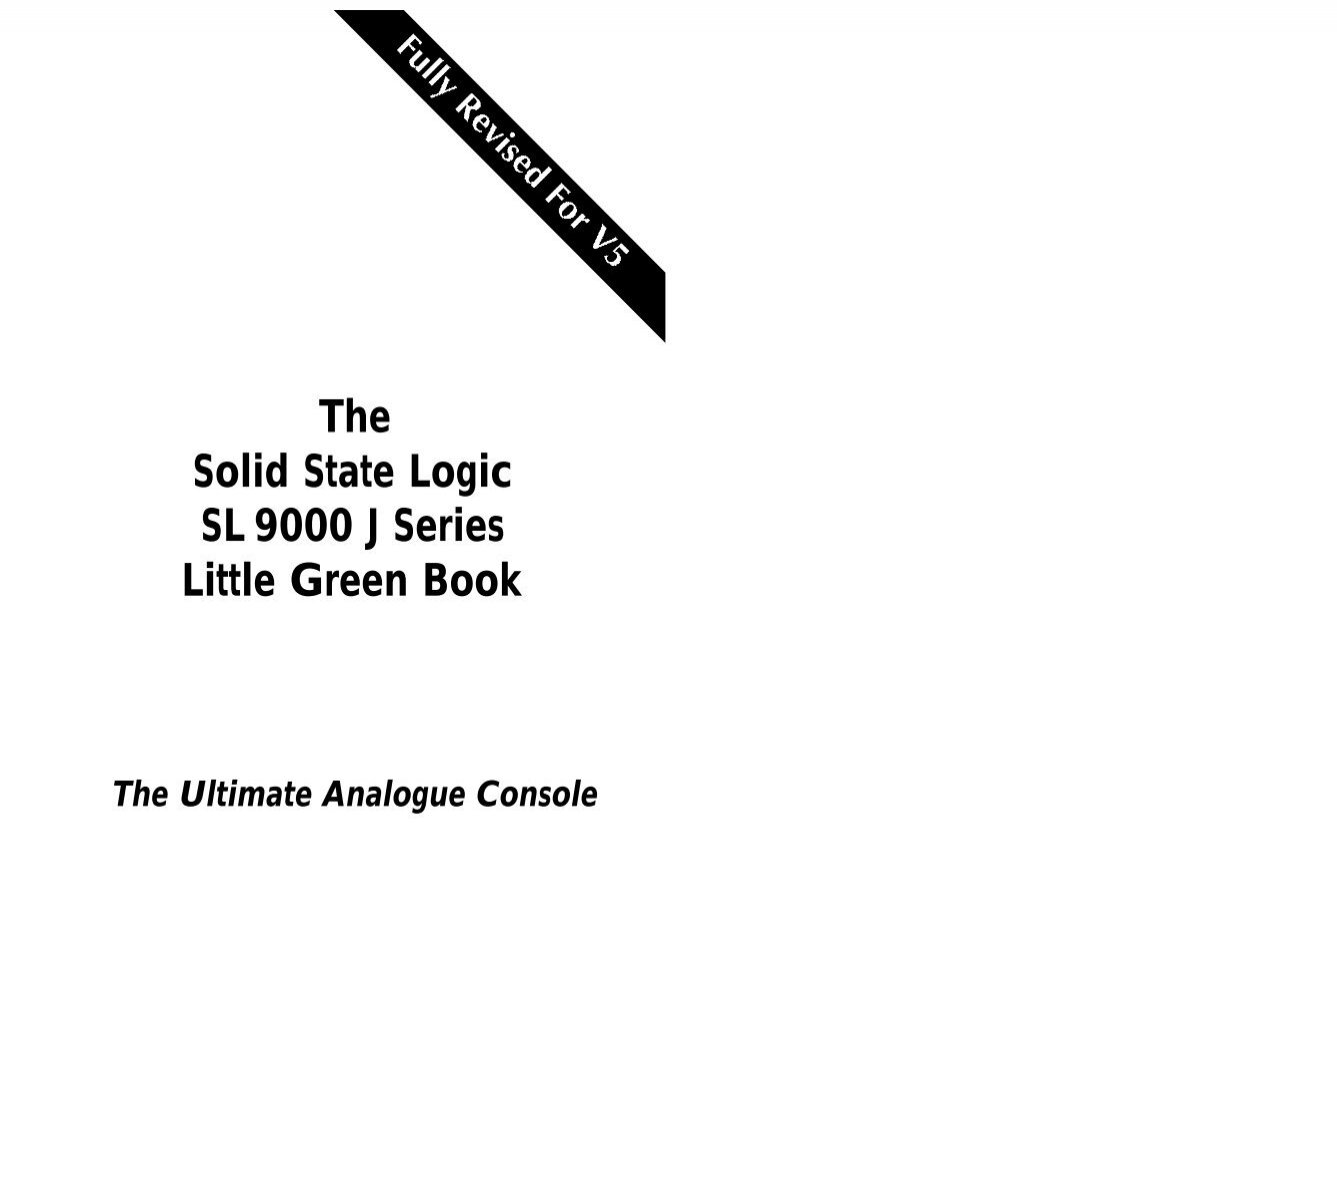 The Solid State Logic SL 9000 J Series Little Green Book